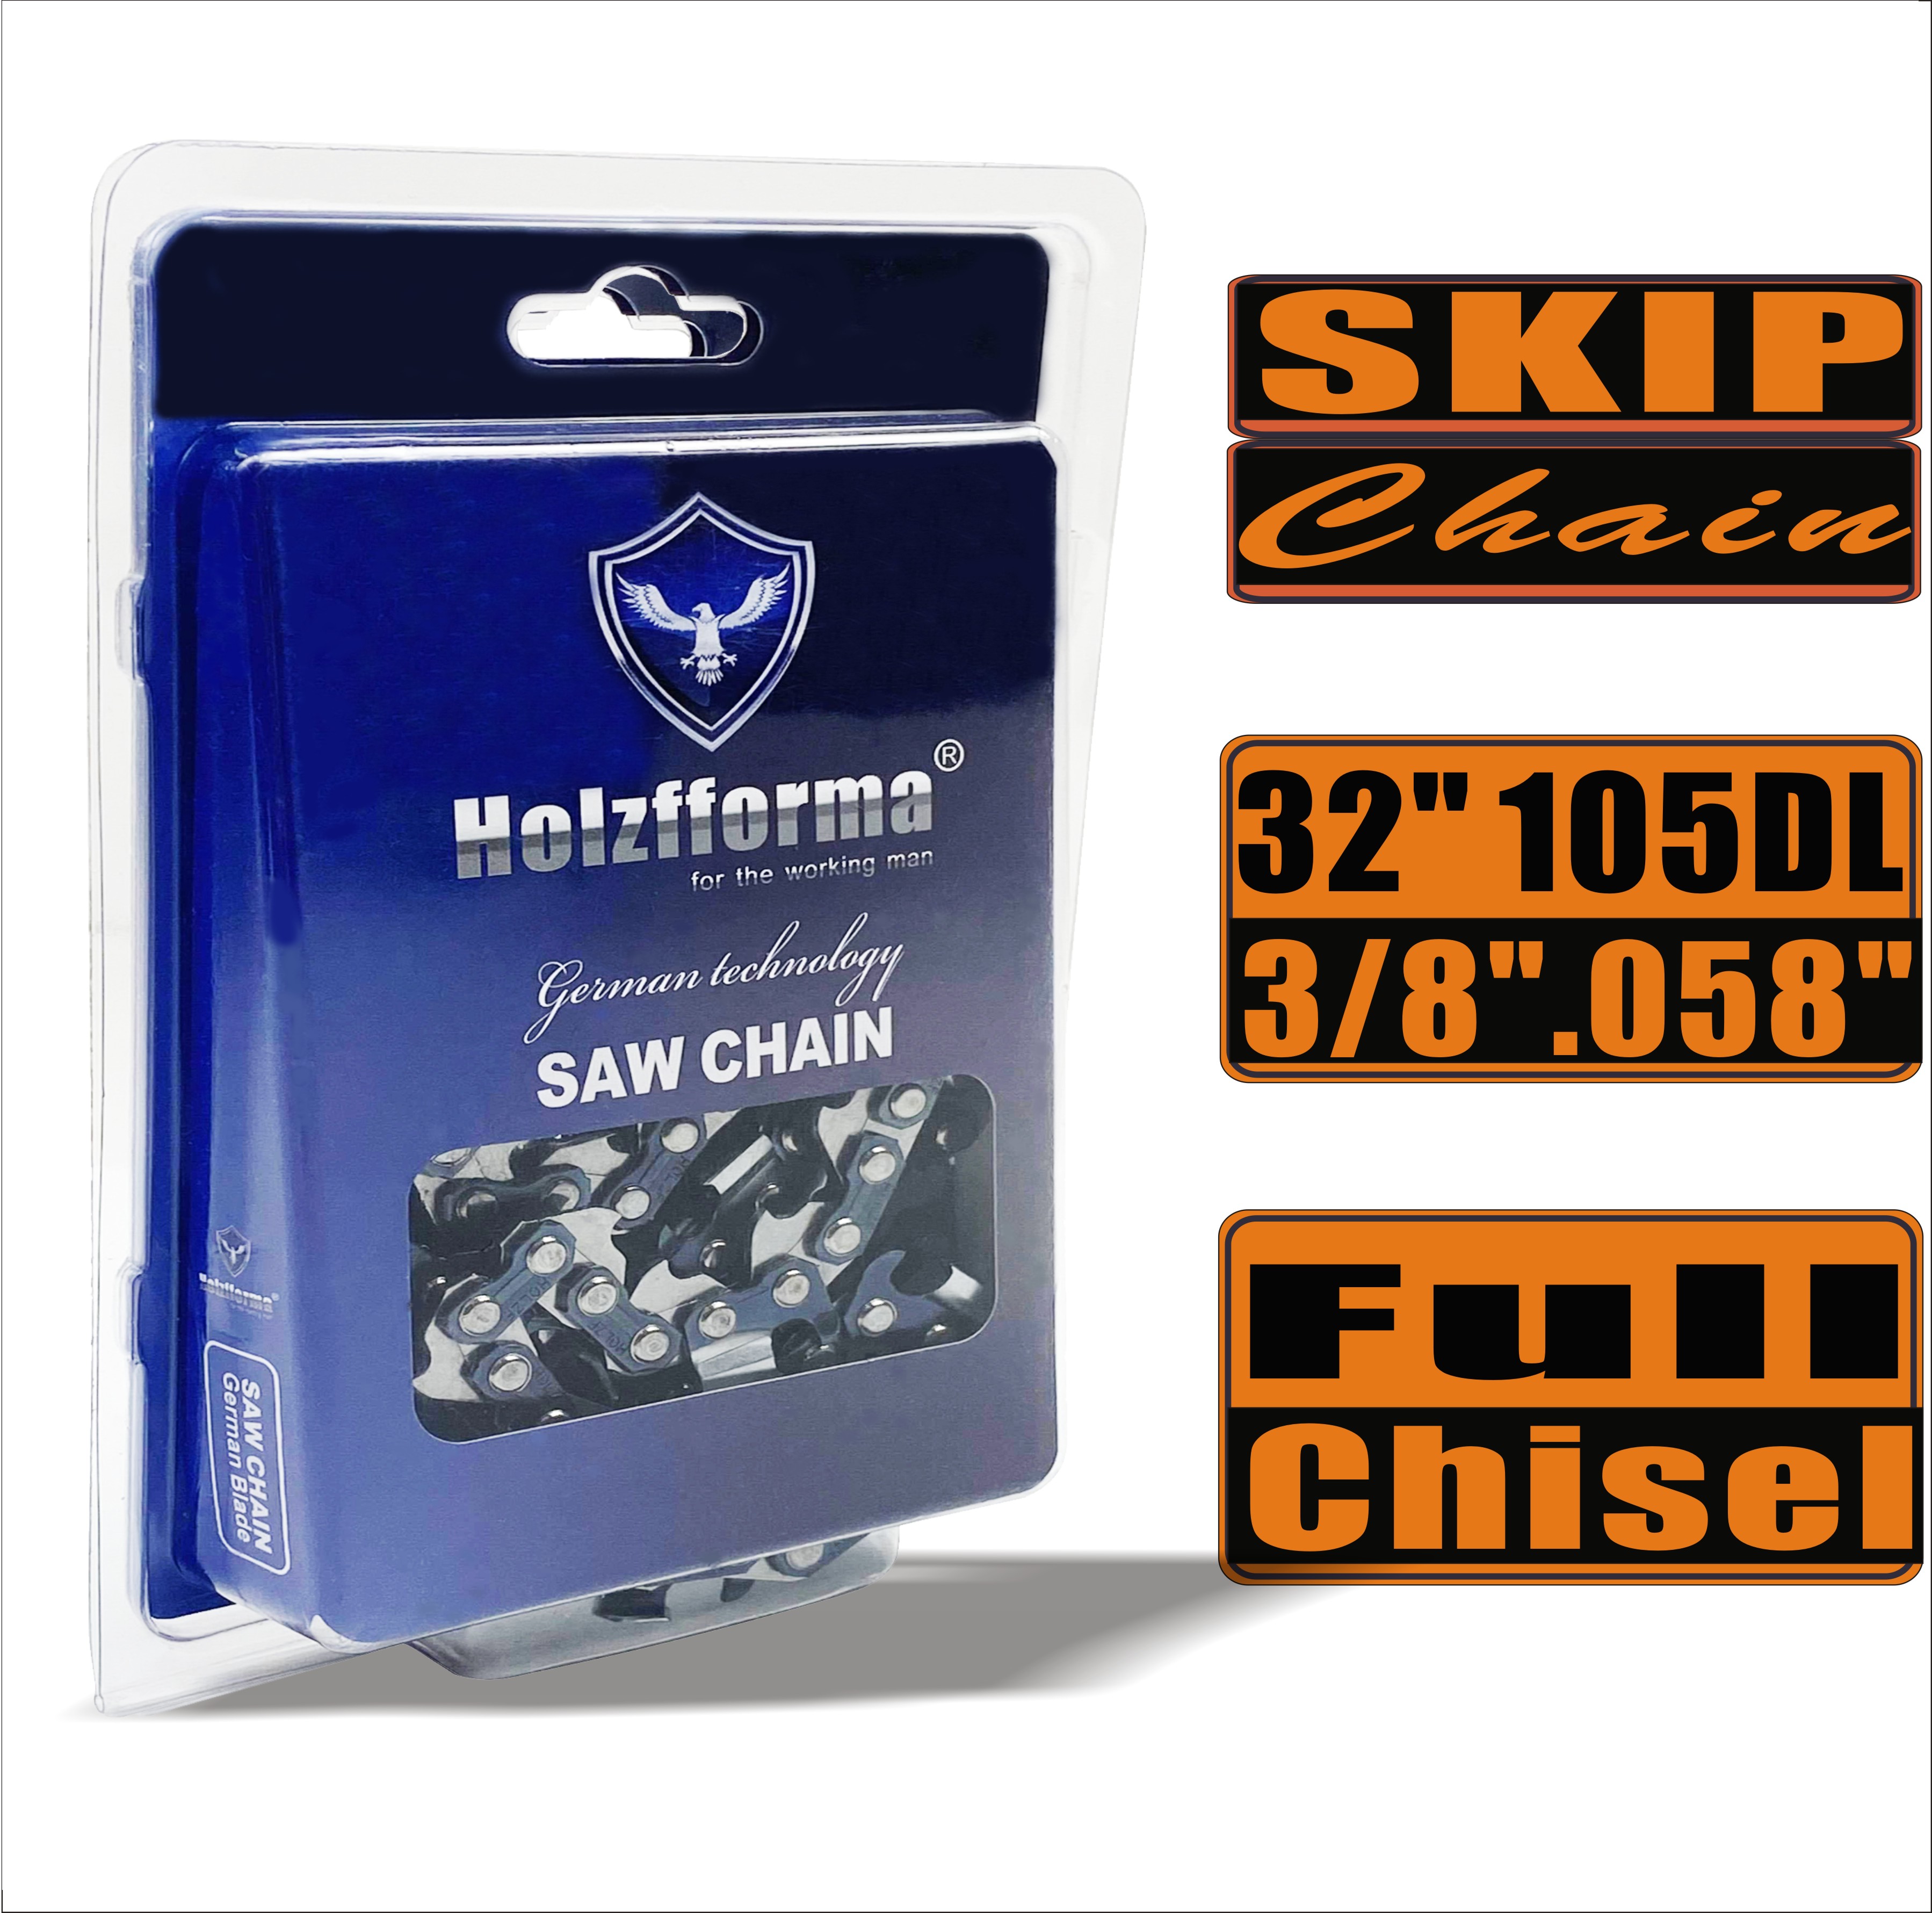 Holzfforma® Skip Chain Full Chisel 3/8'' .058'' 32inch 105DL Chainsaw Saw Chain Top Quality German Blades and Links